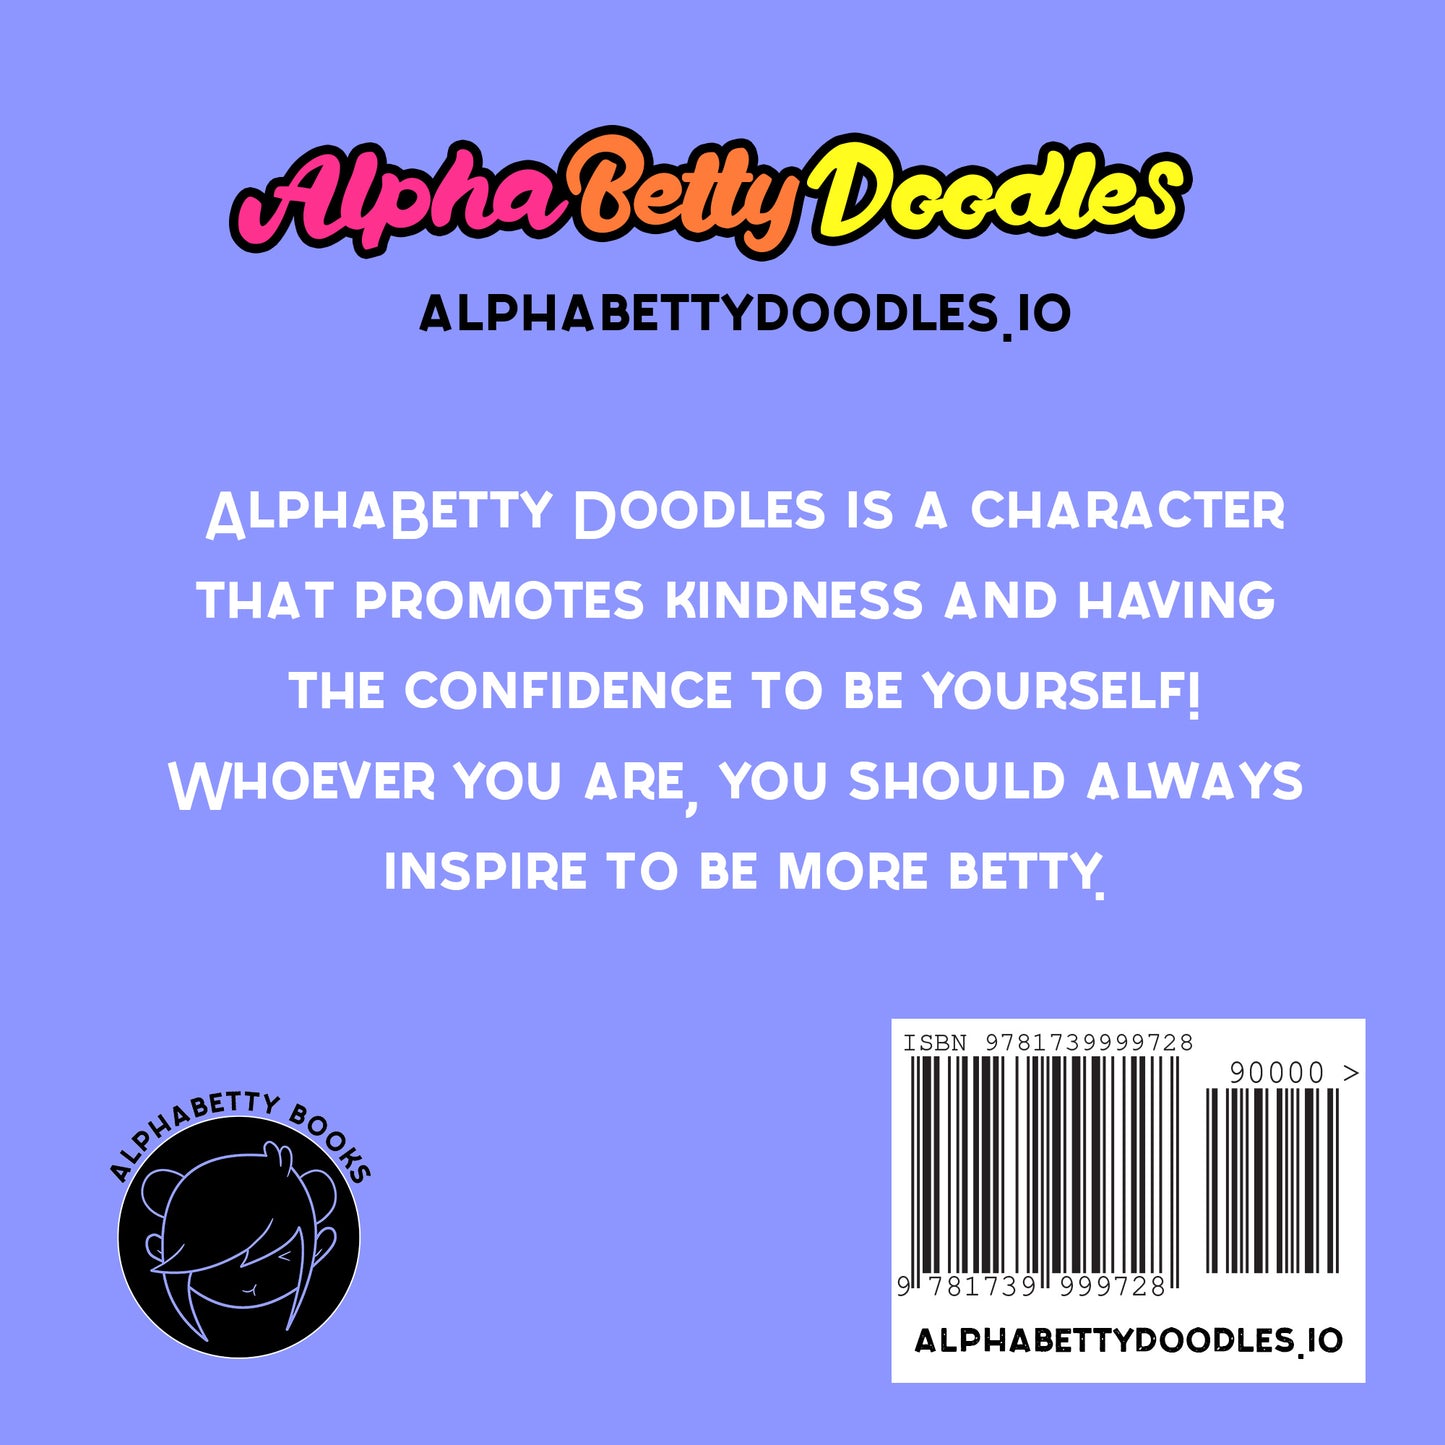 AlphaBetty Doodles: Be More Betty